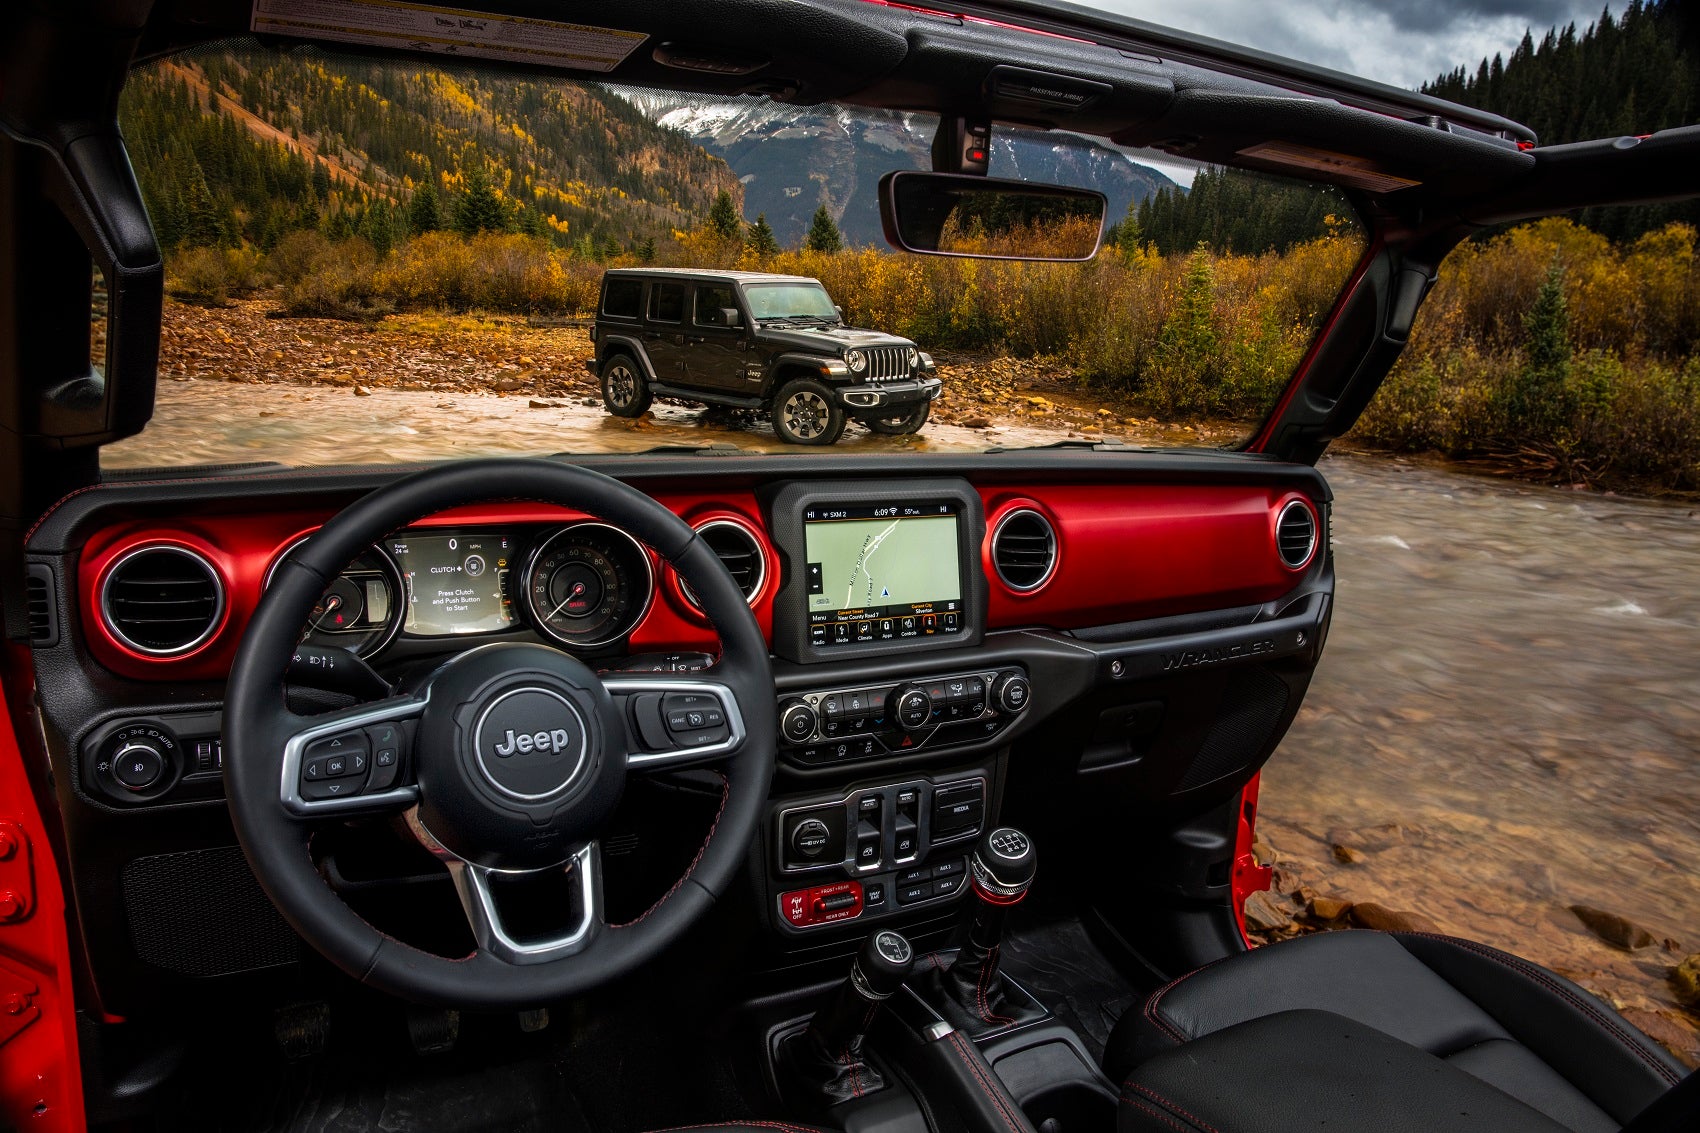 Jeep Wrangler Lease Deals near Indianapolis IN